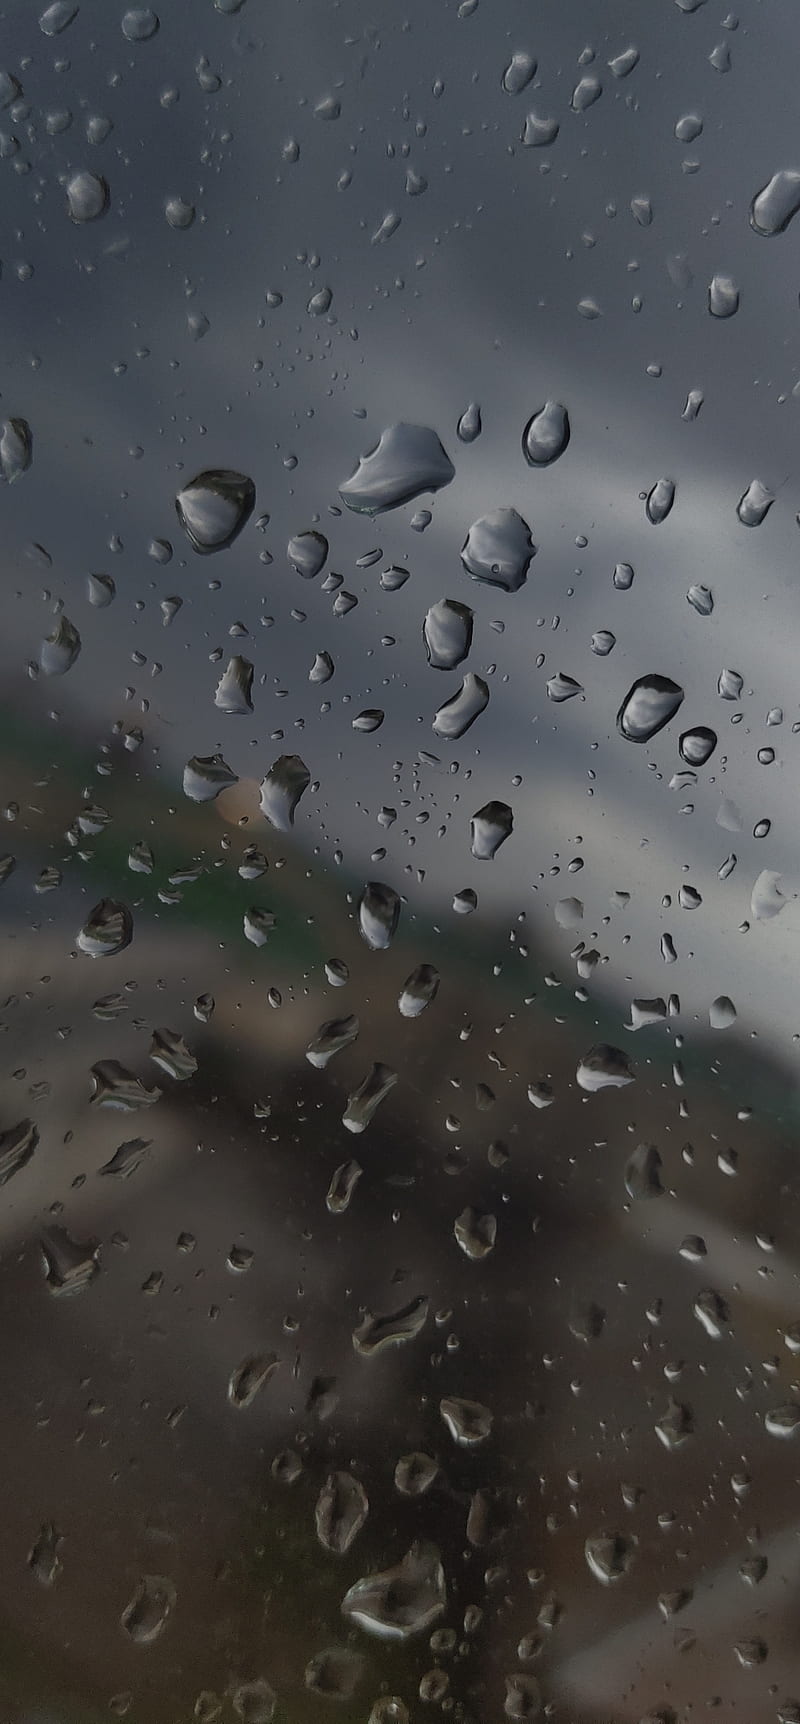 Drops of Water on Window Glass after Rain with Dramatic Blurred Sunset on  Background. Idyllic Tranquil Nature Wallpaper Stock Photo - Image of  wallpaper, reflection: 151547516